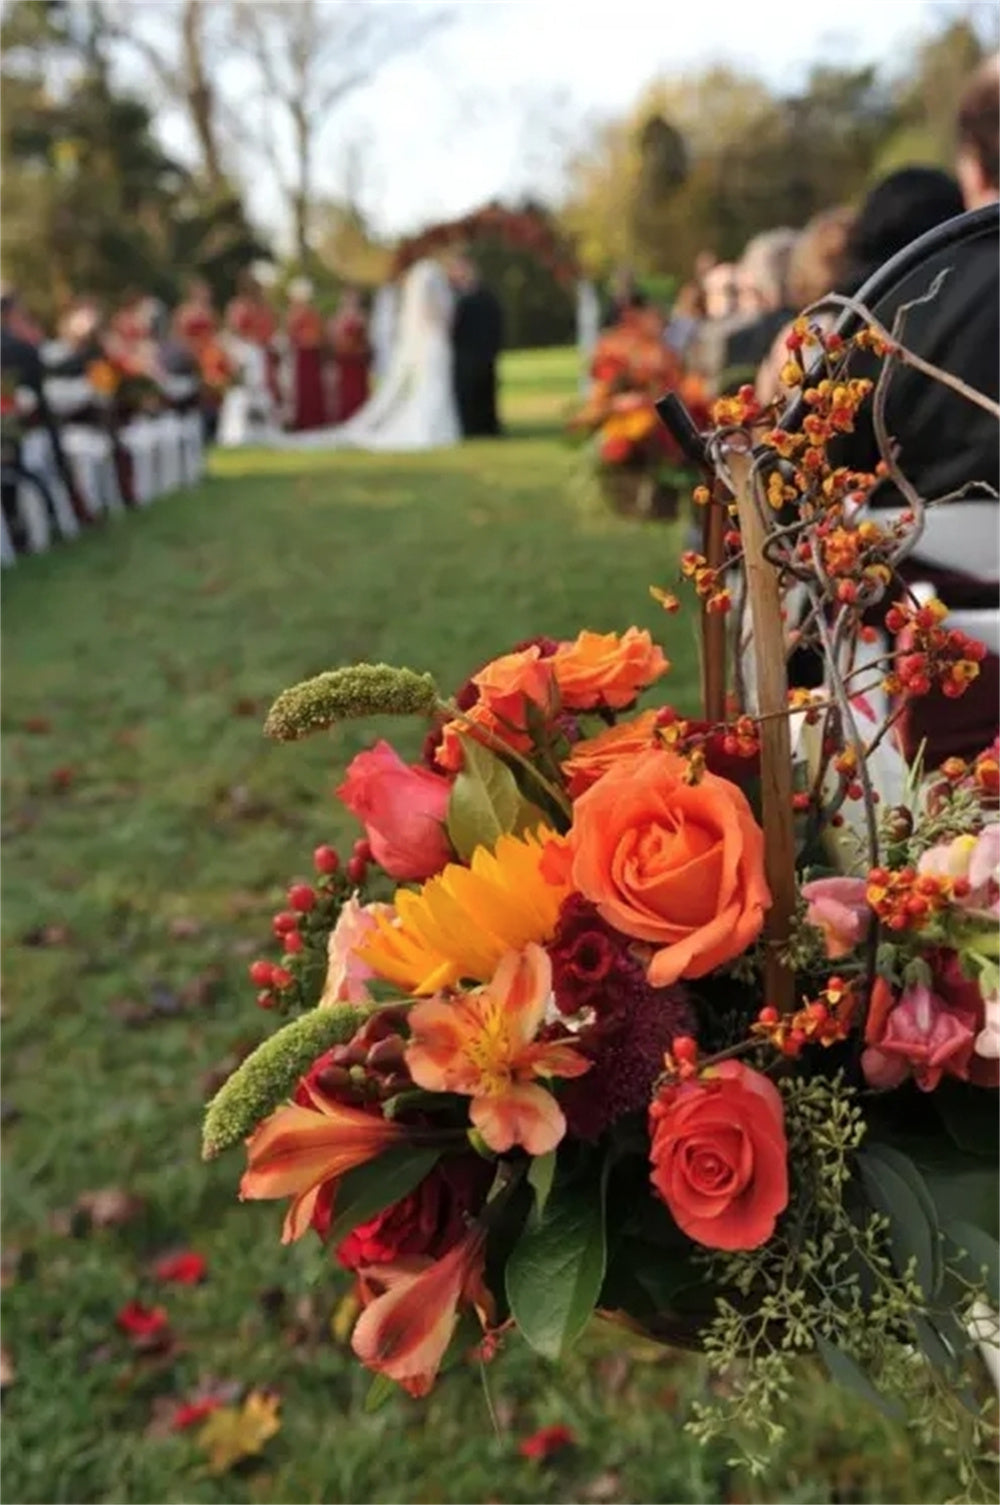 Spring Wedding Aisle Decorations with Flowers